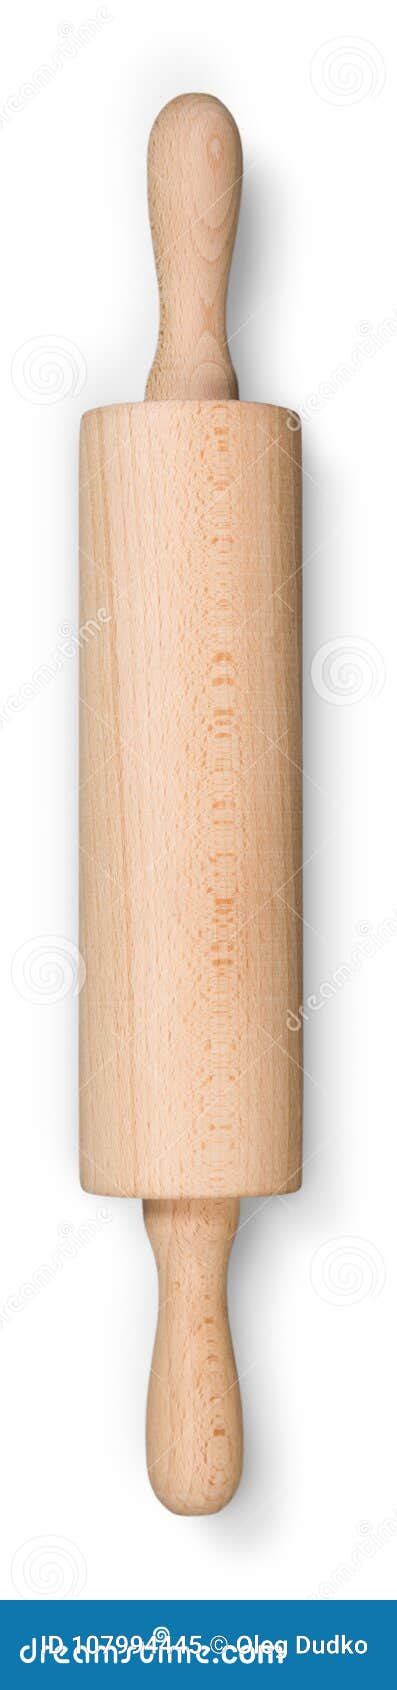 Kitchen Rolling Pin Isolated On White Background Stock Image Image Of